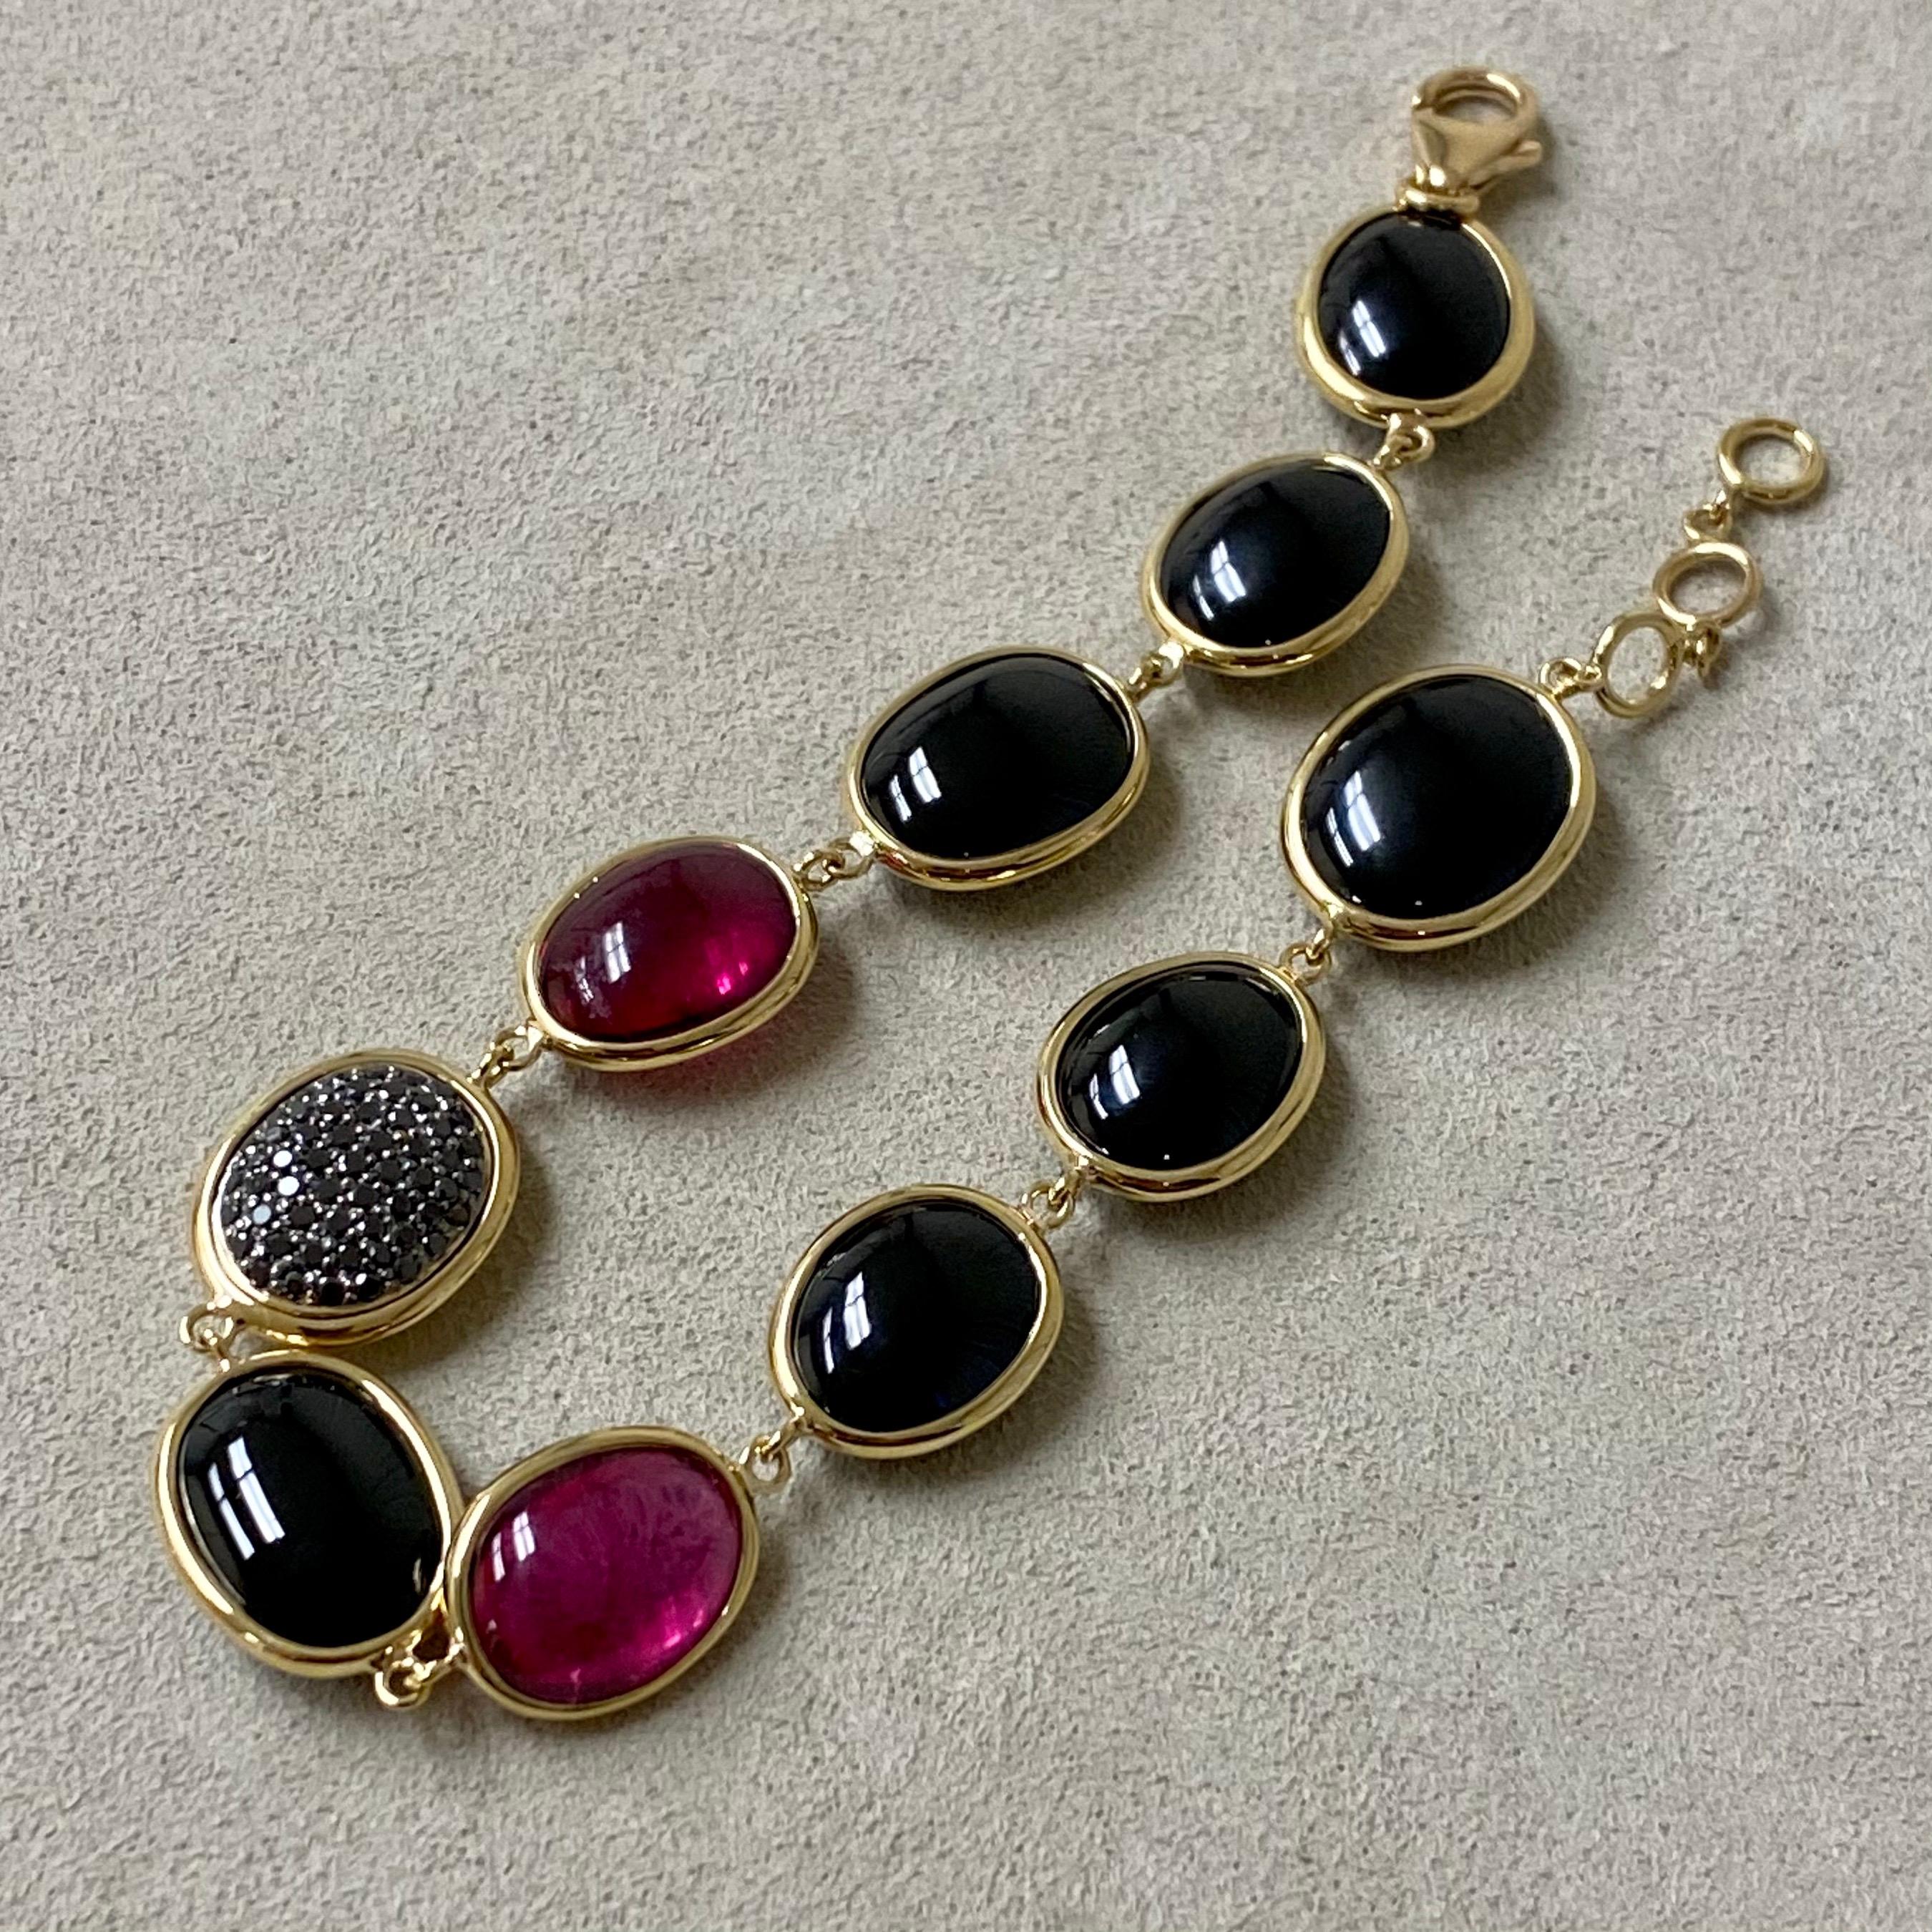 Created in 18 karat yellow gold
Black Diamonds 0.40 carats approx.
Rubellite 15 carats approx.
Black Spinel 65 carats approx.
8 inches with lobster clasp

This stunning bracelet is crafted from 18 karat yellow gold and accented with 0.40 carats of